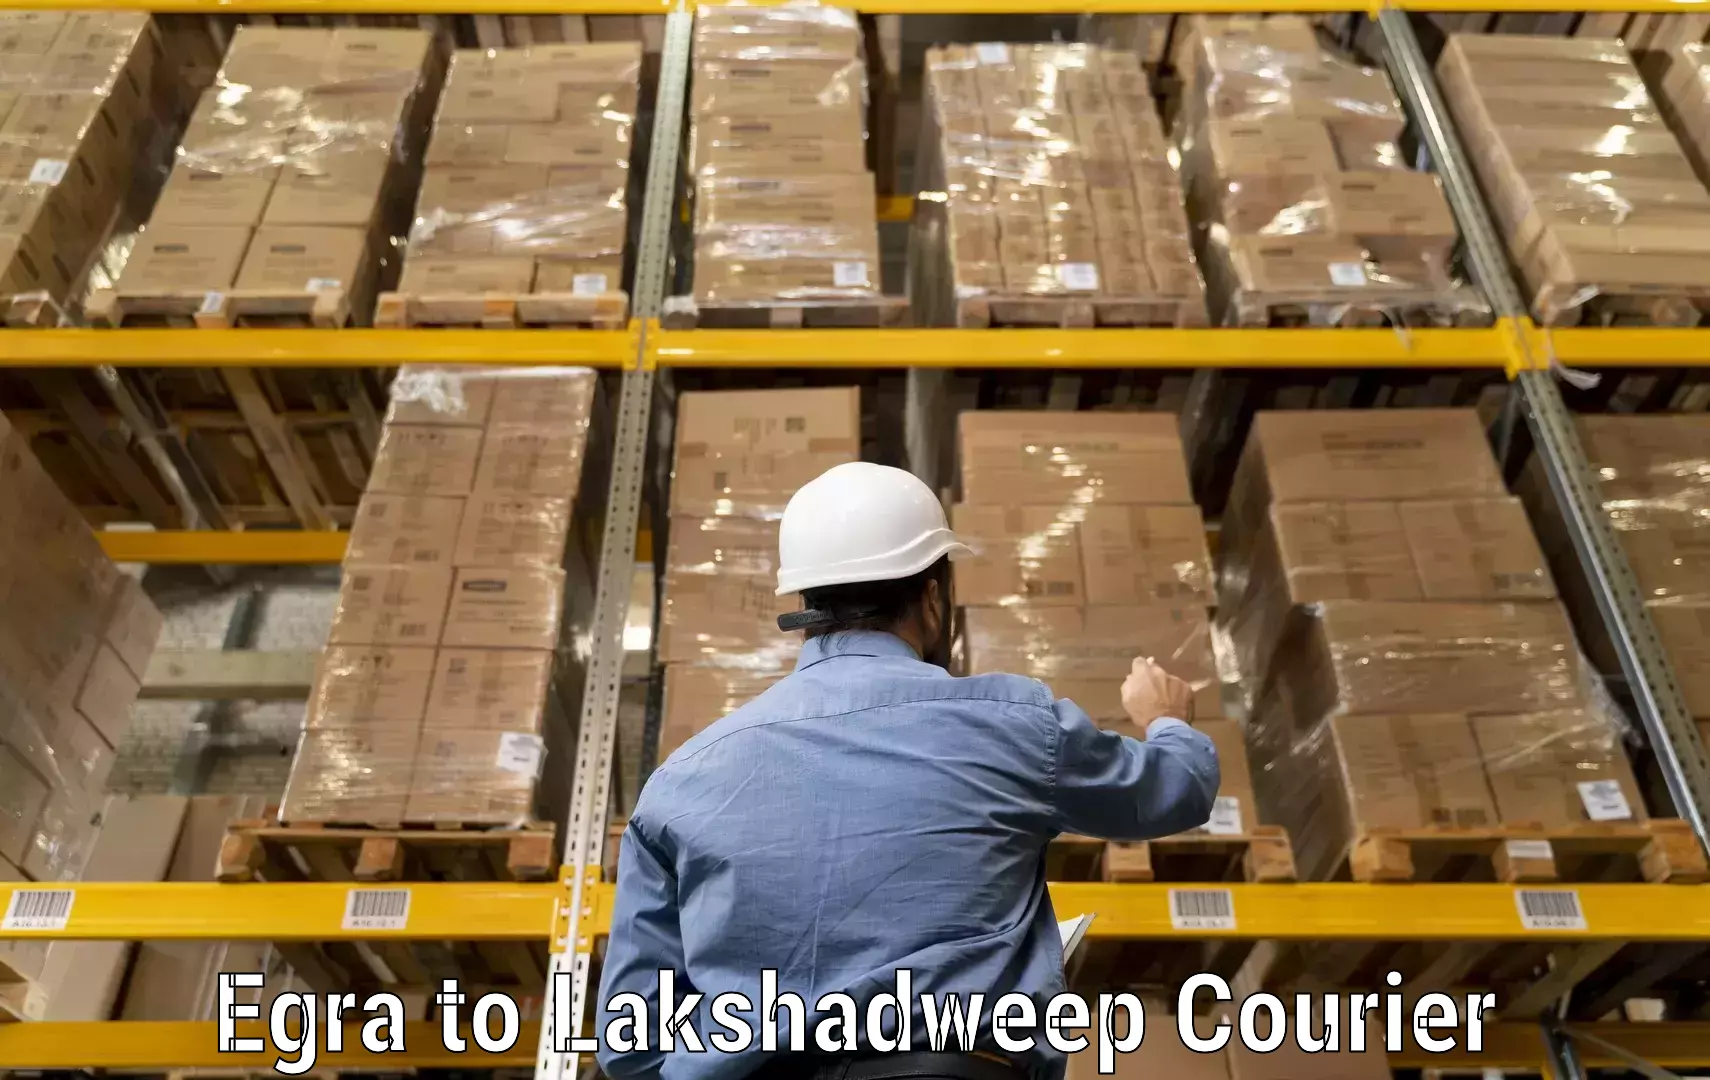 Quality courier services in Egra to Lakshadweep